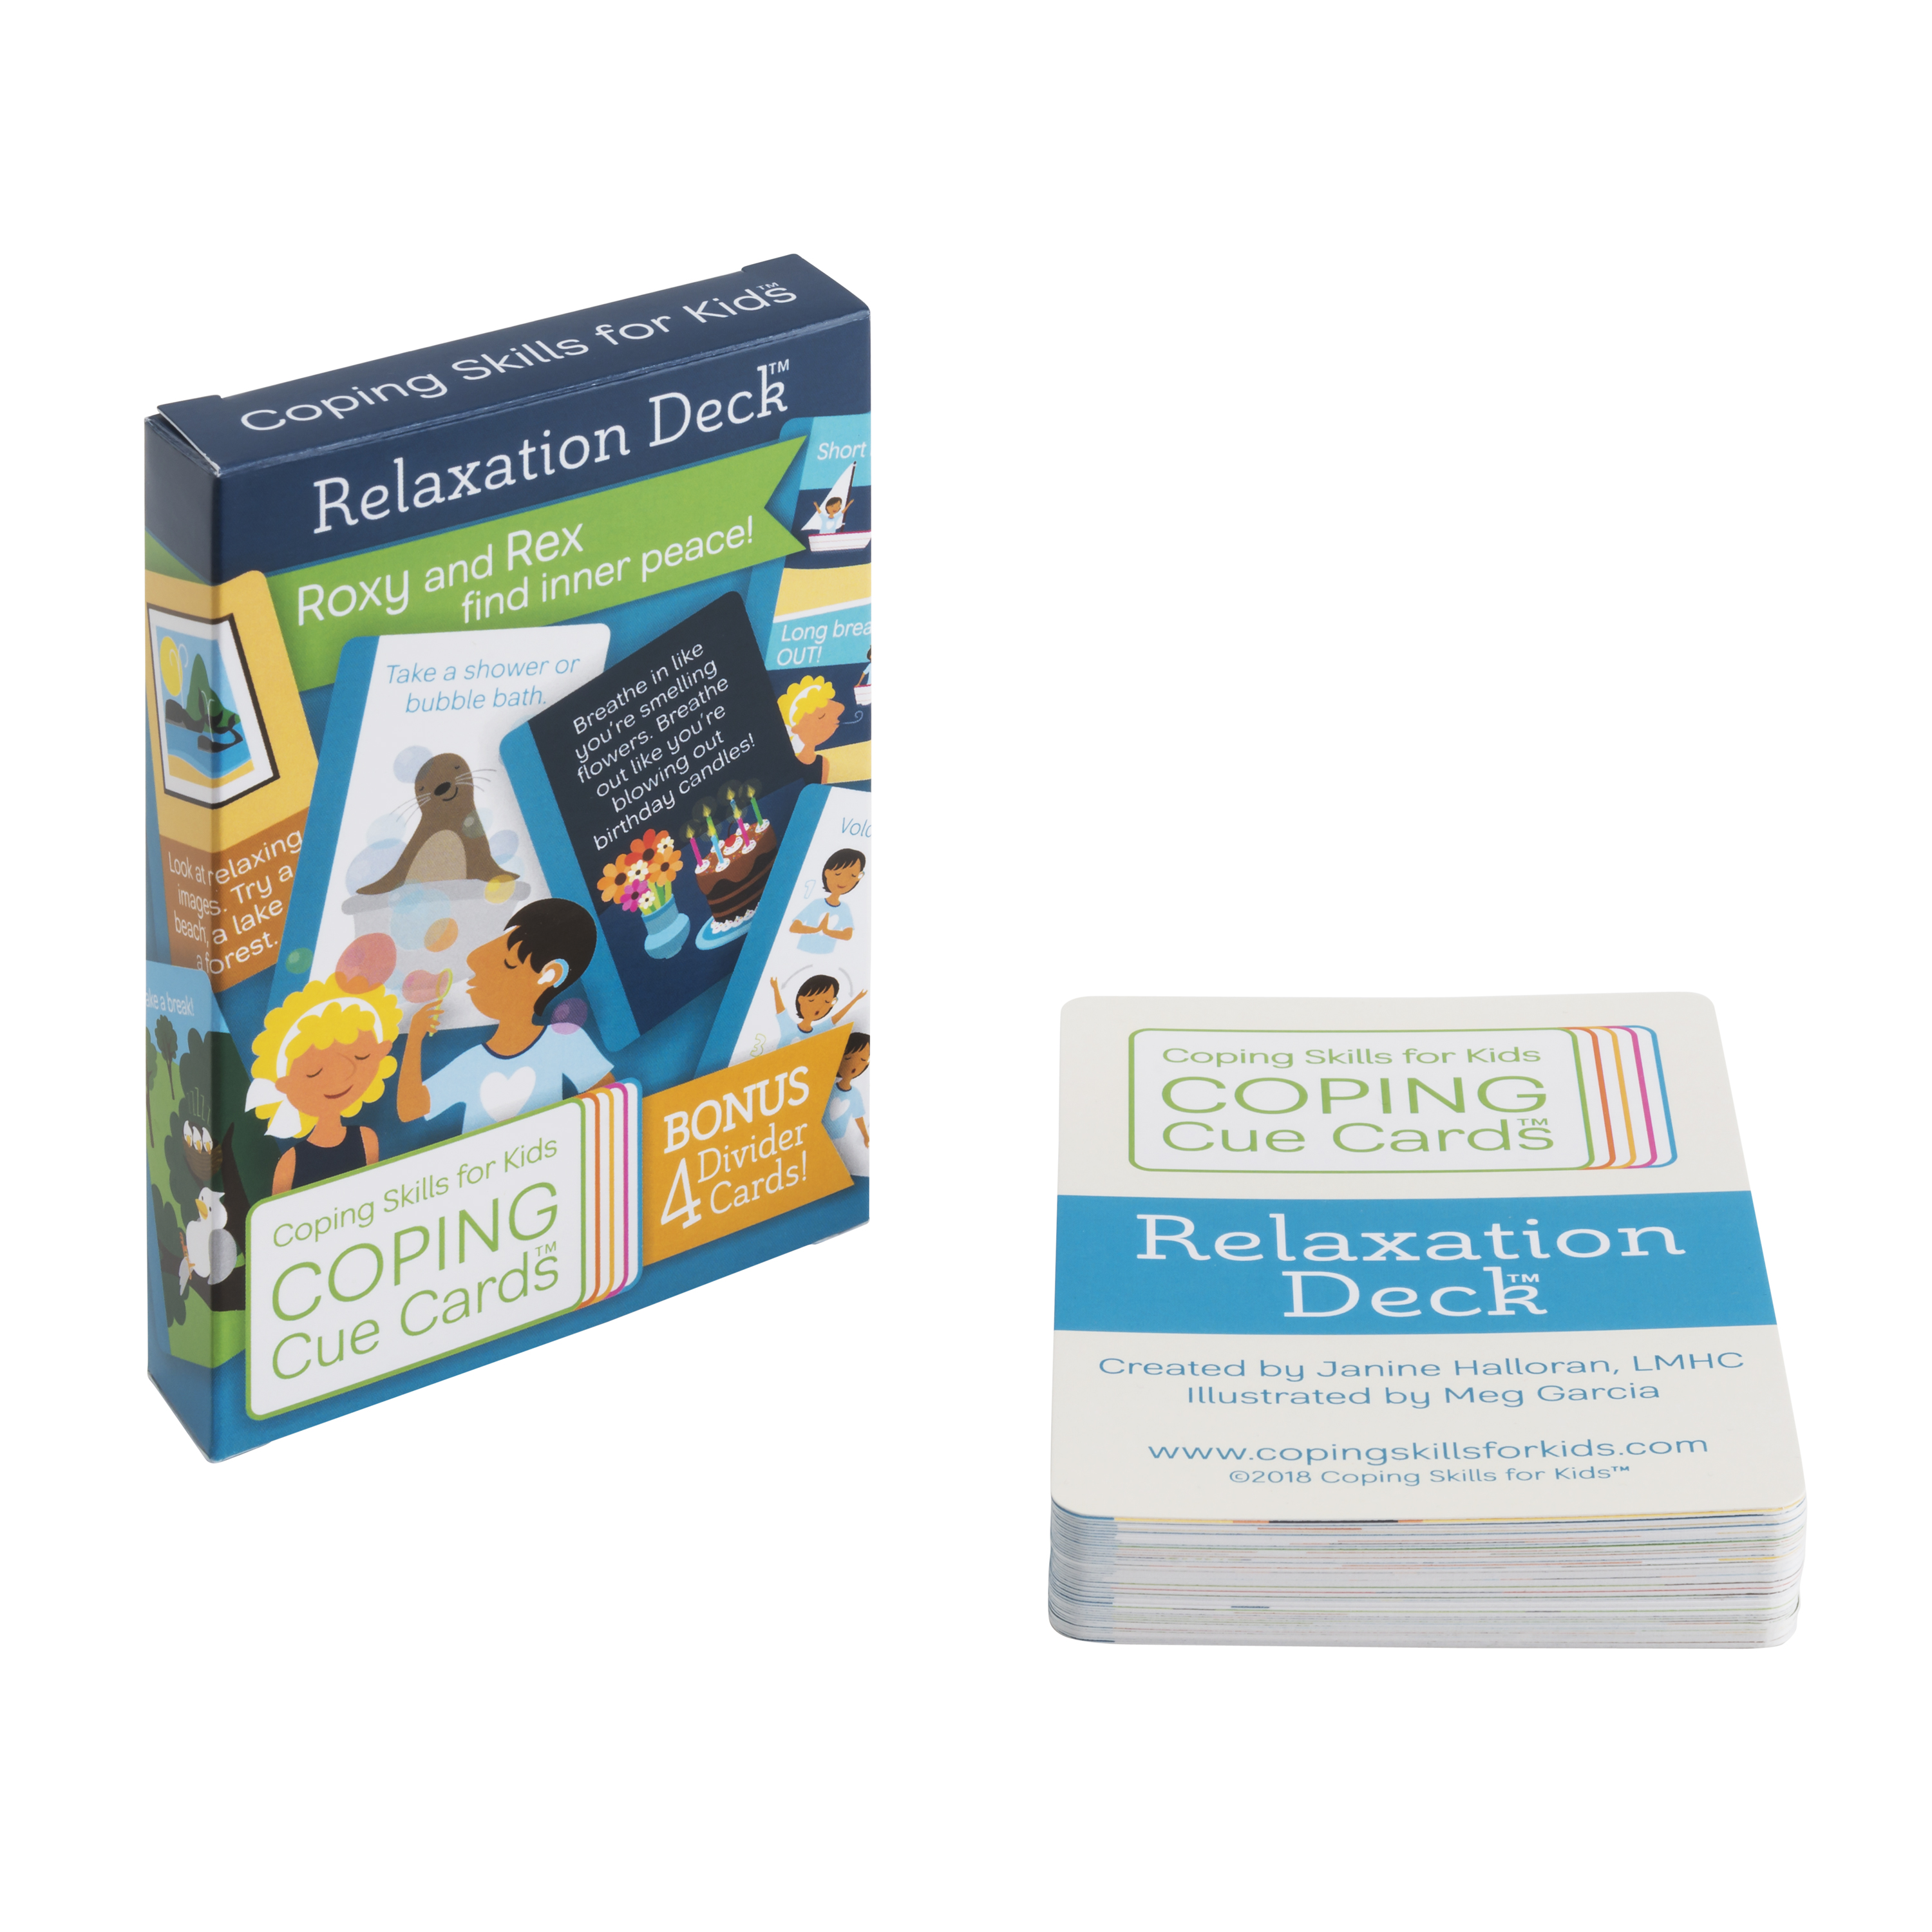 Coping Cue Cards Relaxation Deck